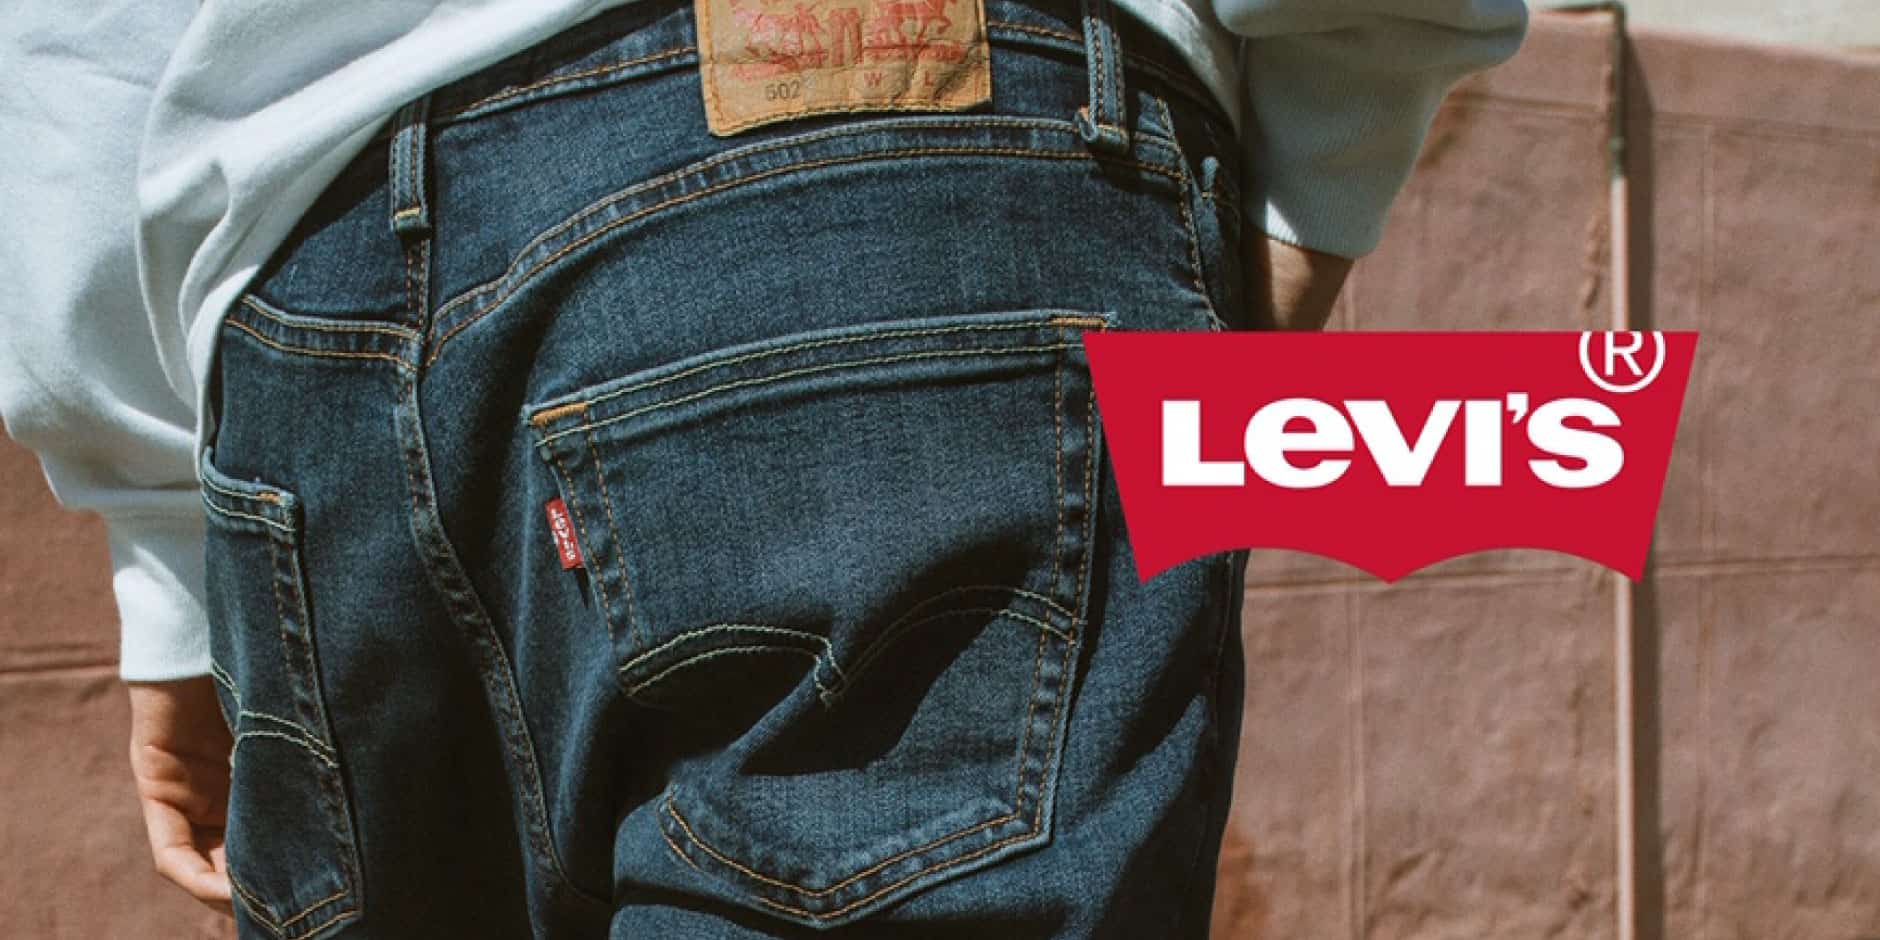 save-up-to-80-off-levi-s-jeans-for-the-entire-family-new-coupons